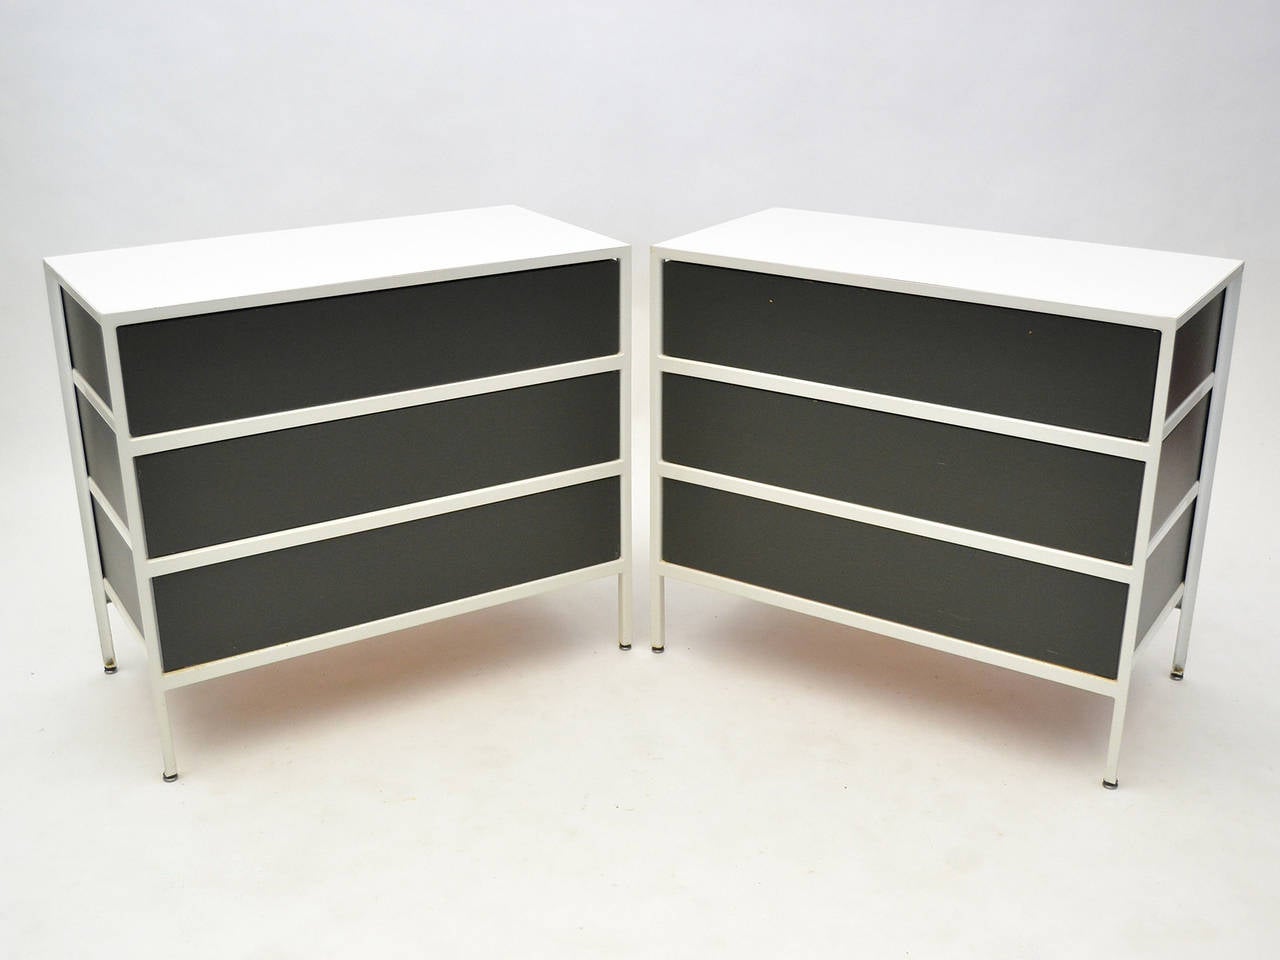 American Pair of George Nelson Steel Frame Chests by Herman Miller